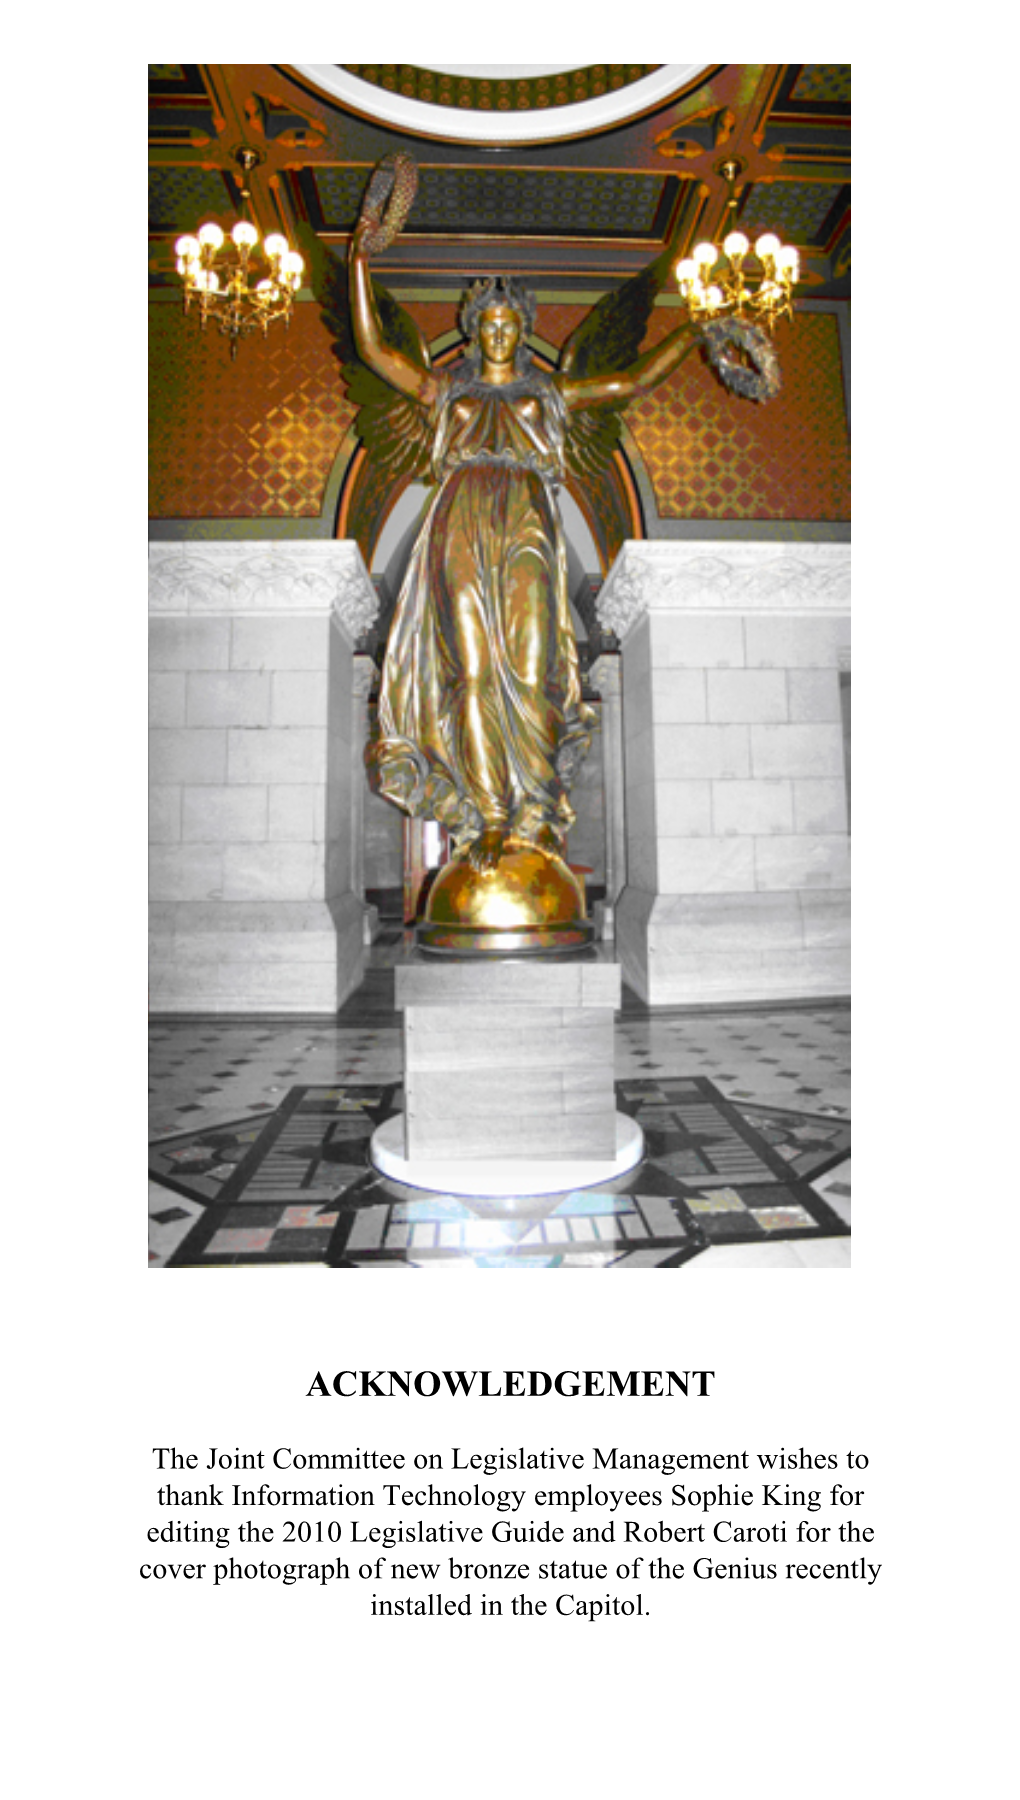 2010 Legislative Guide and Robert Caroti for the Cover Photograph of New Bronze Statue of the Genius Recently Installed in the Capitol